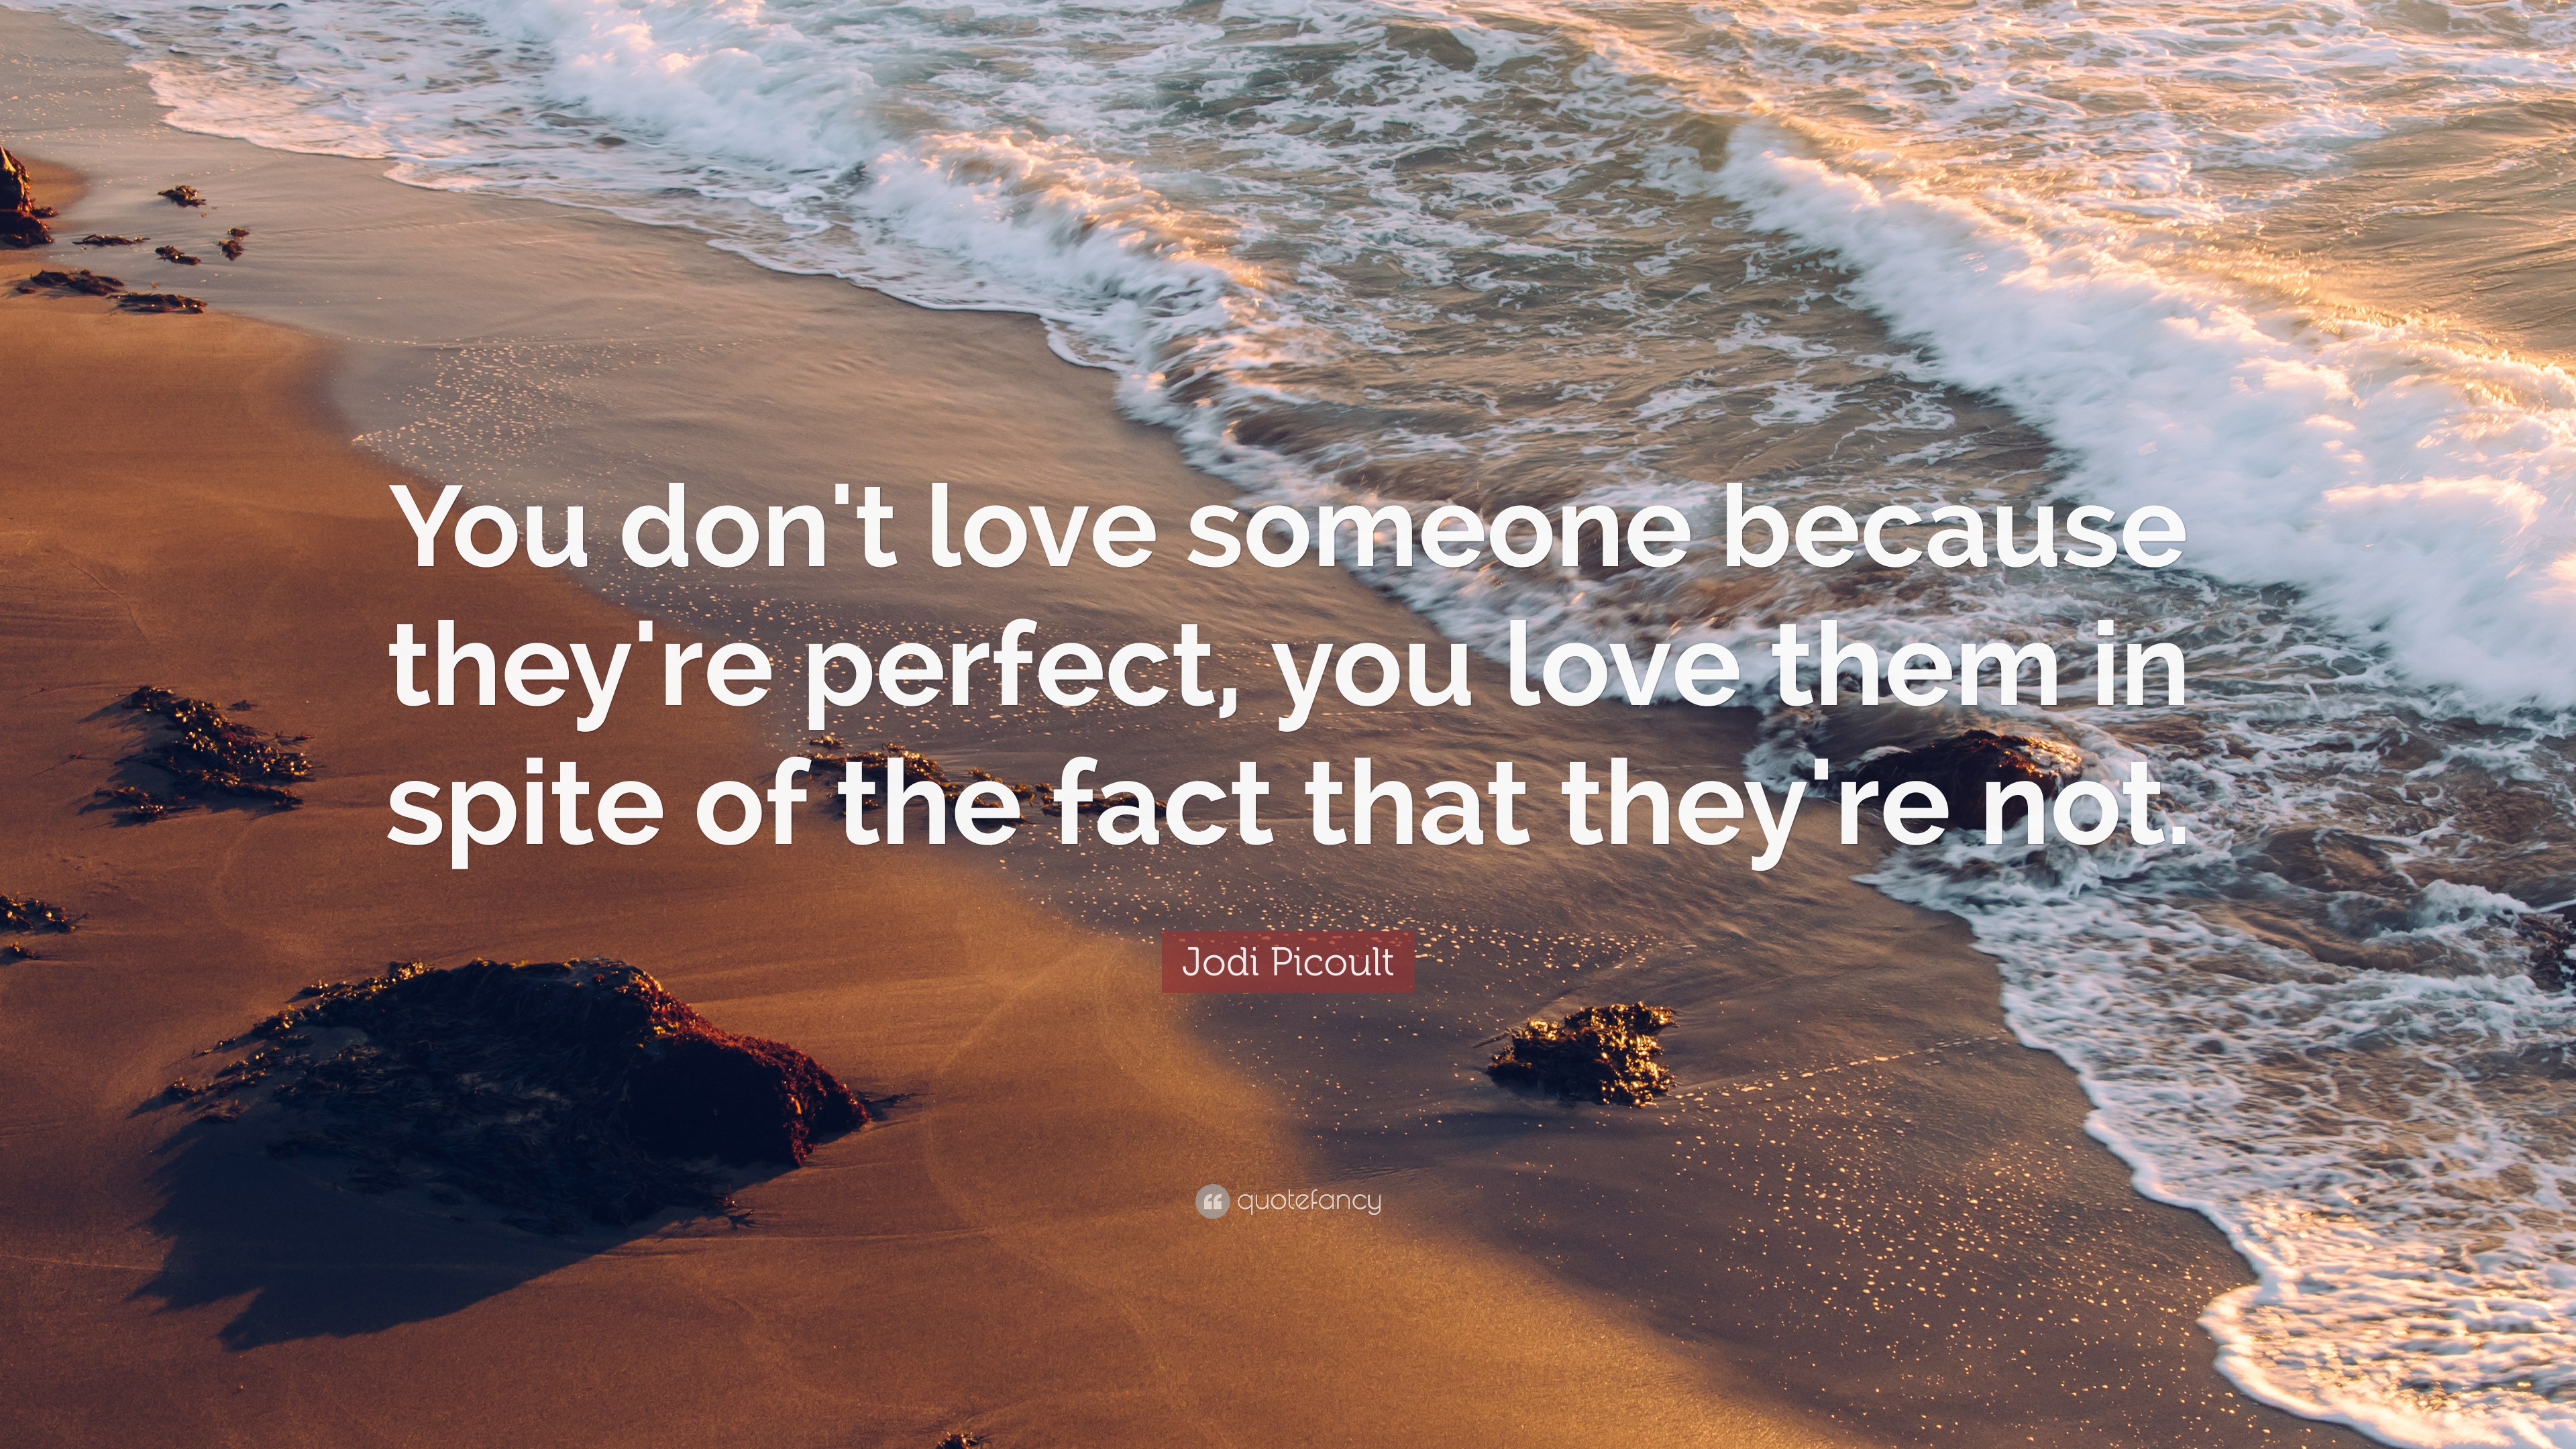 Jodi Picoult Quote: “You don't love someone because they're perfect ...